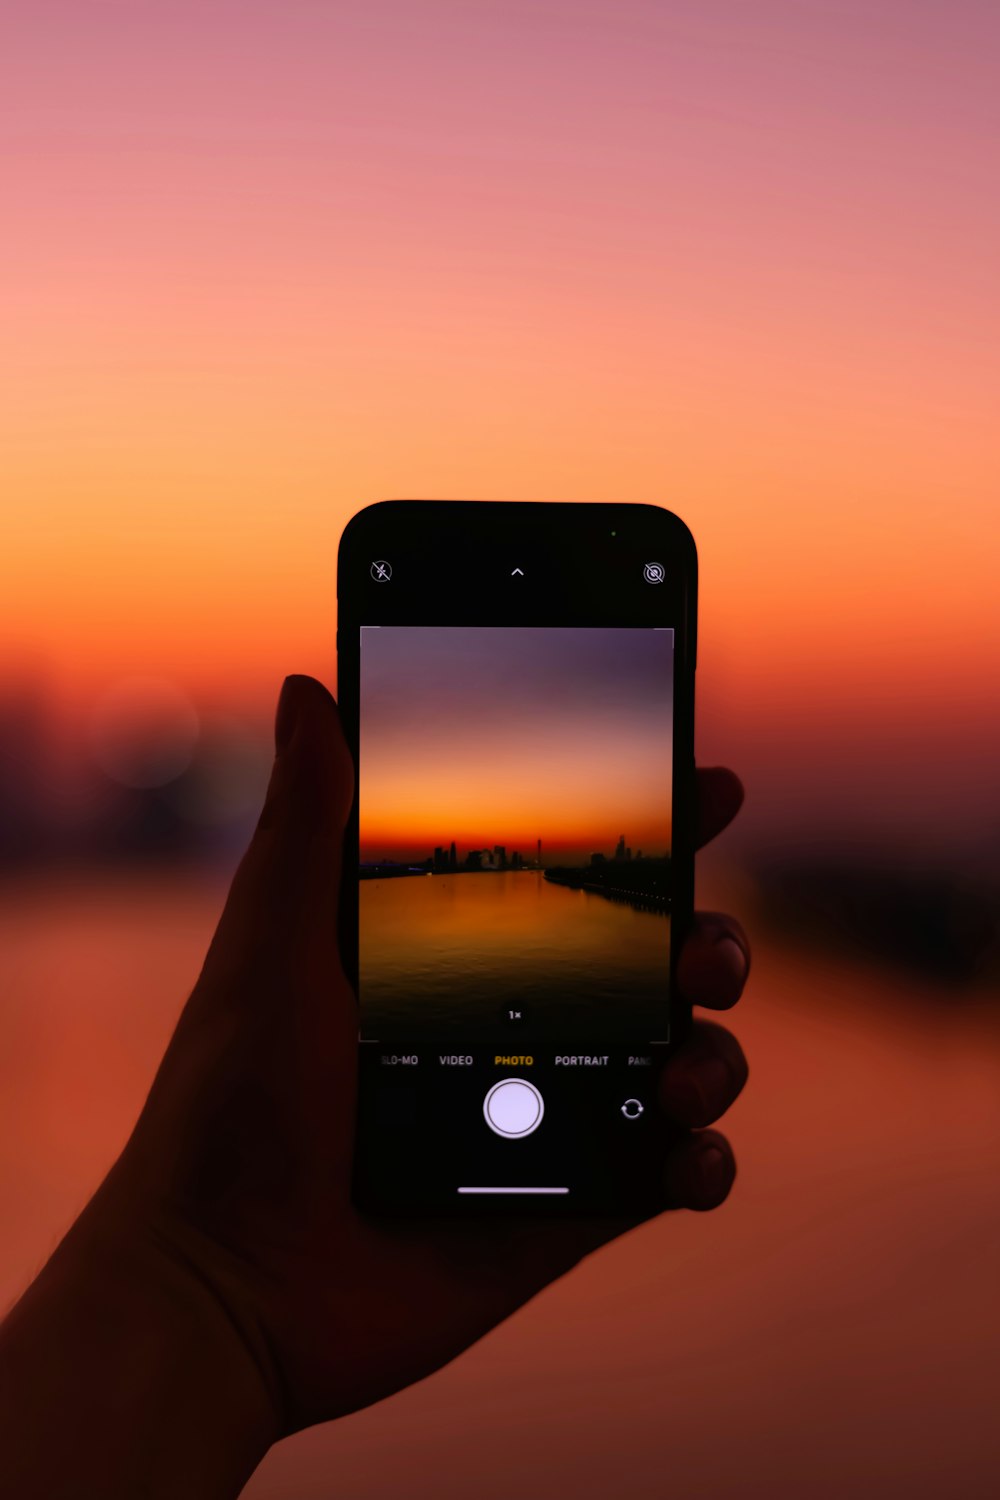 person holding iphone taking photo of sunset